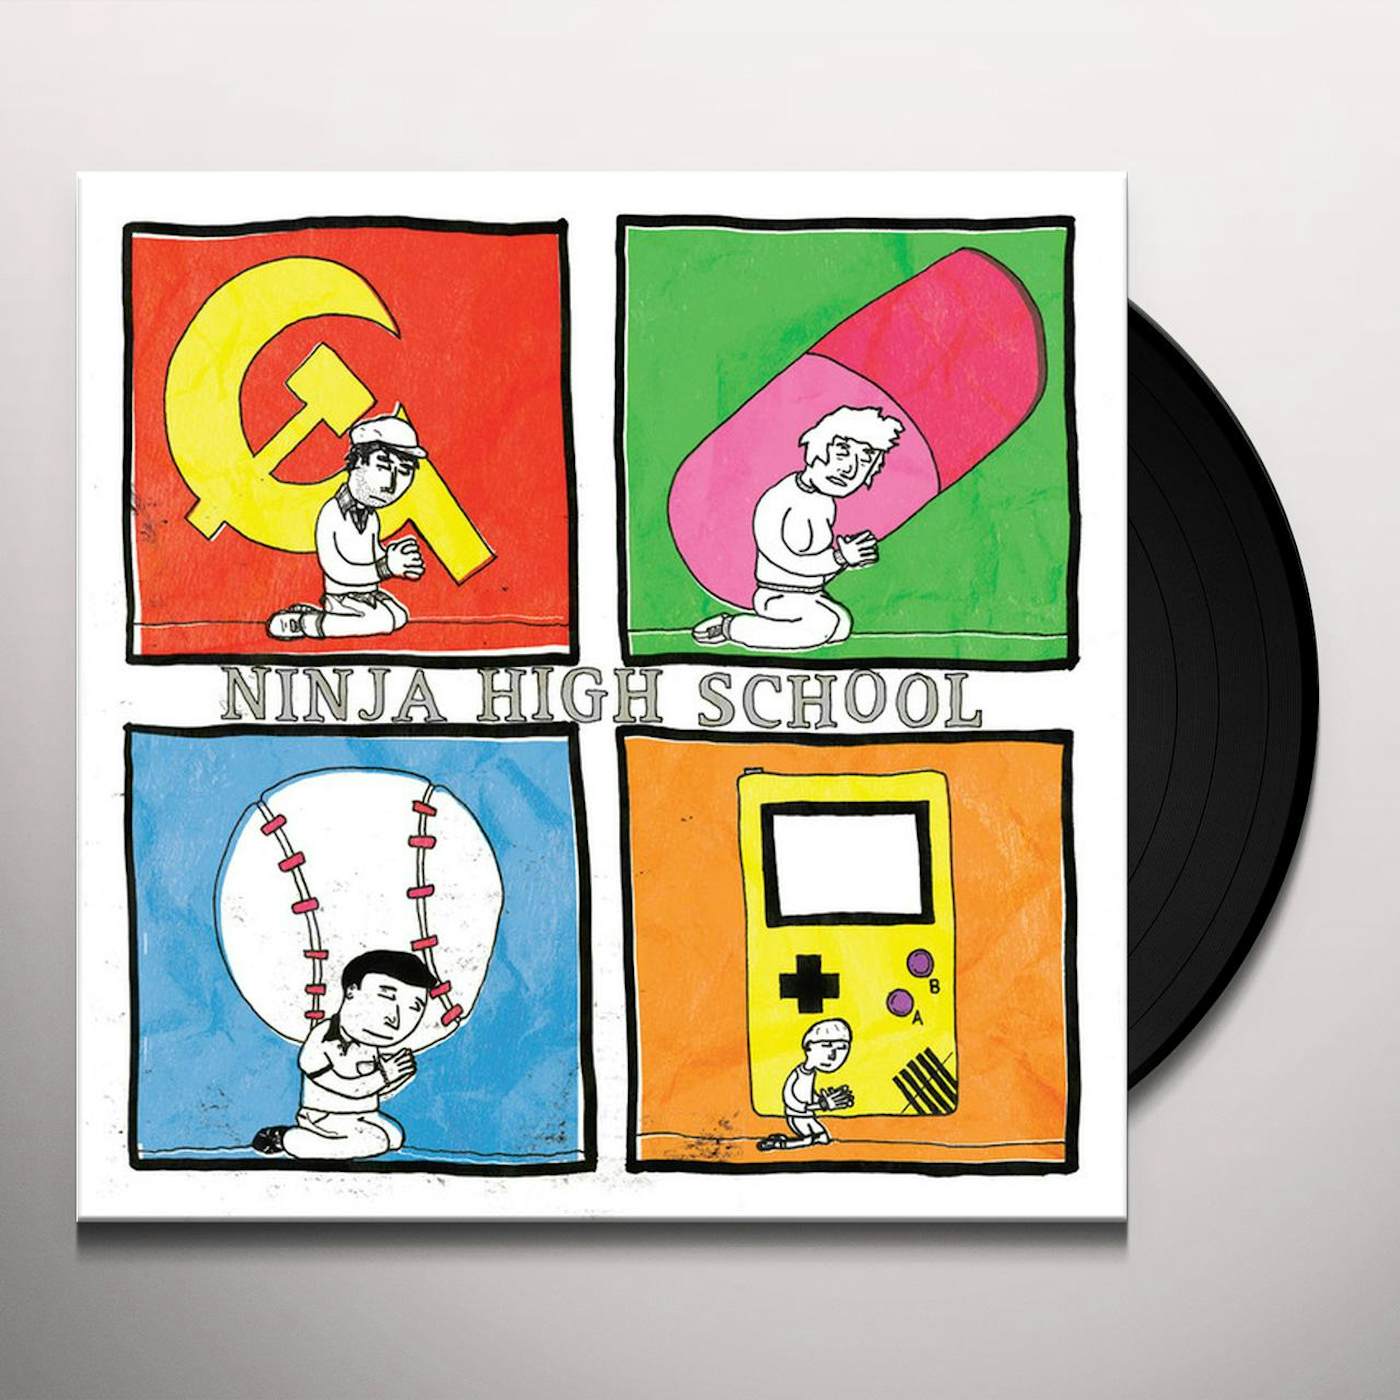 Ninja High School Young Adults Against Suicide Vinyl Record